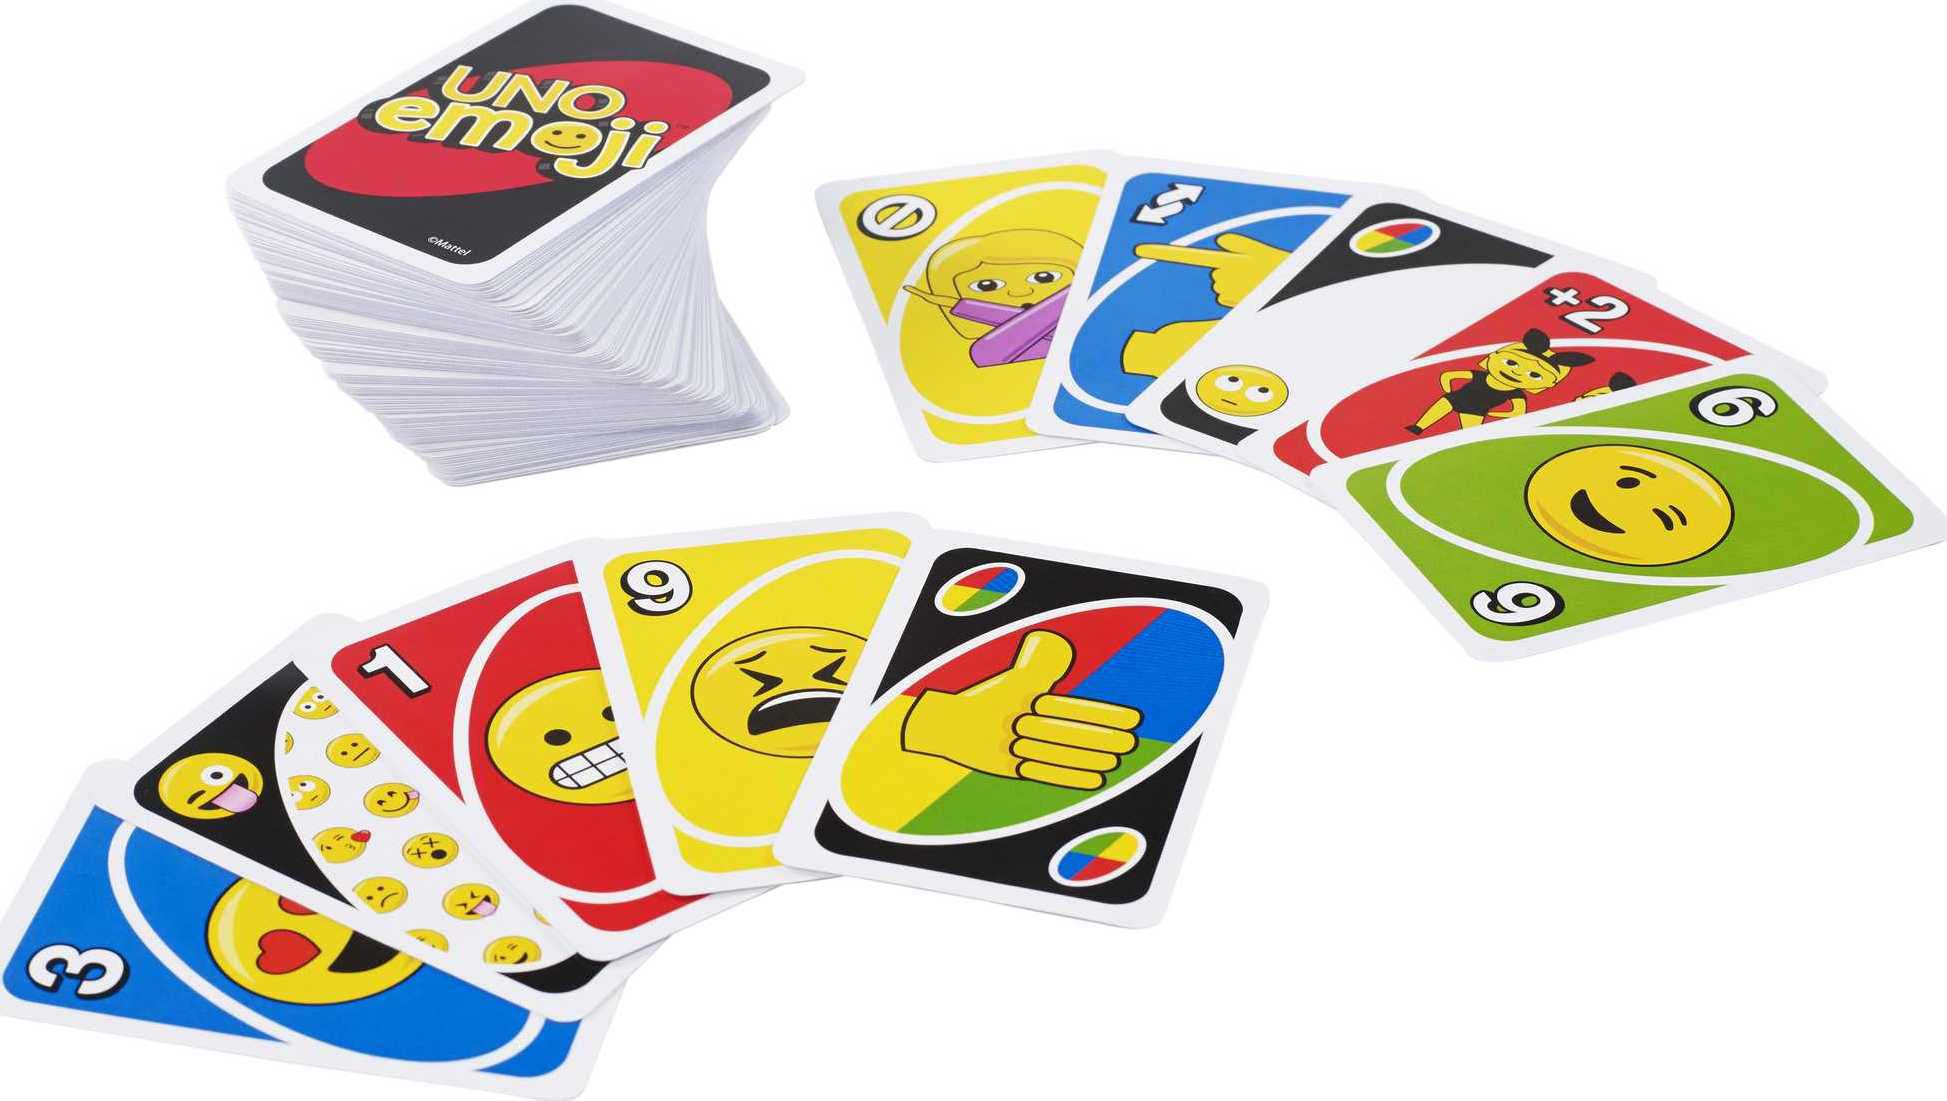 Mattel Games UNO Emojis Multicolor Basic Pack for 7 years and up